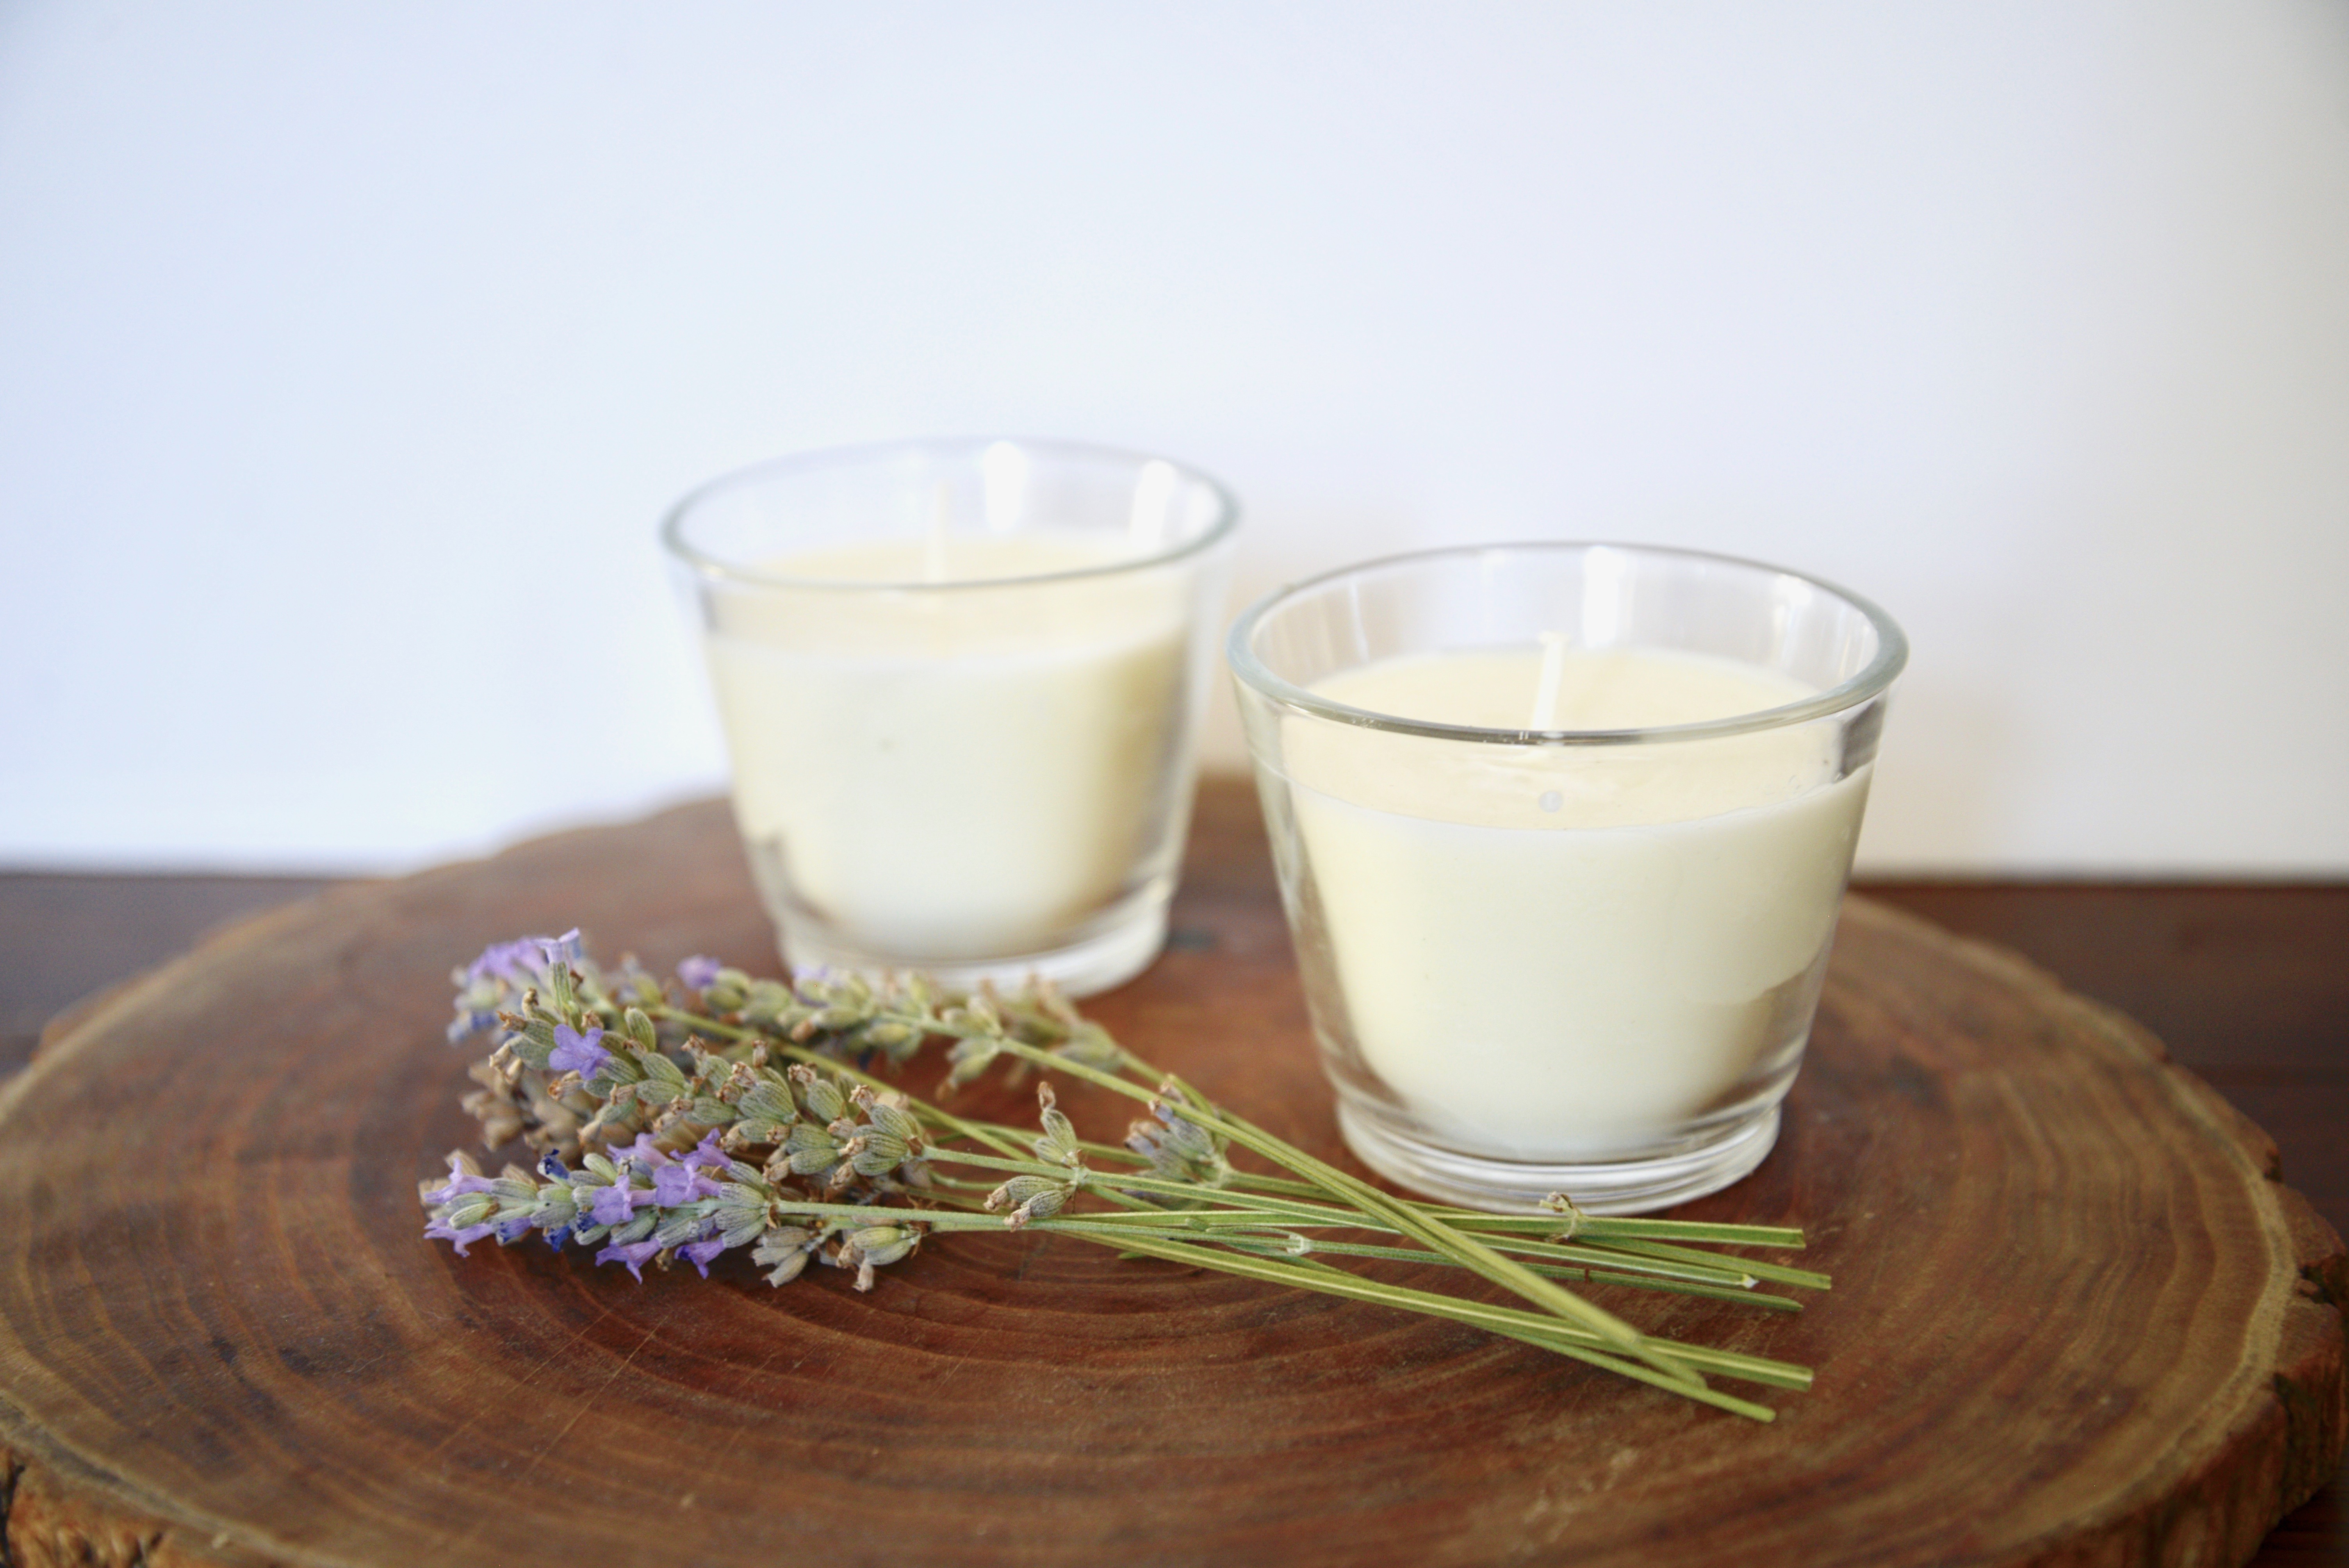 soy wax and bees wax candles 